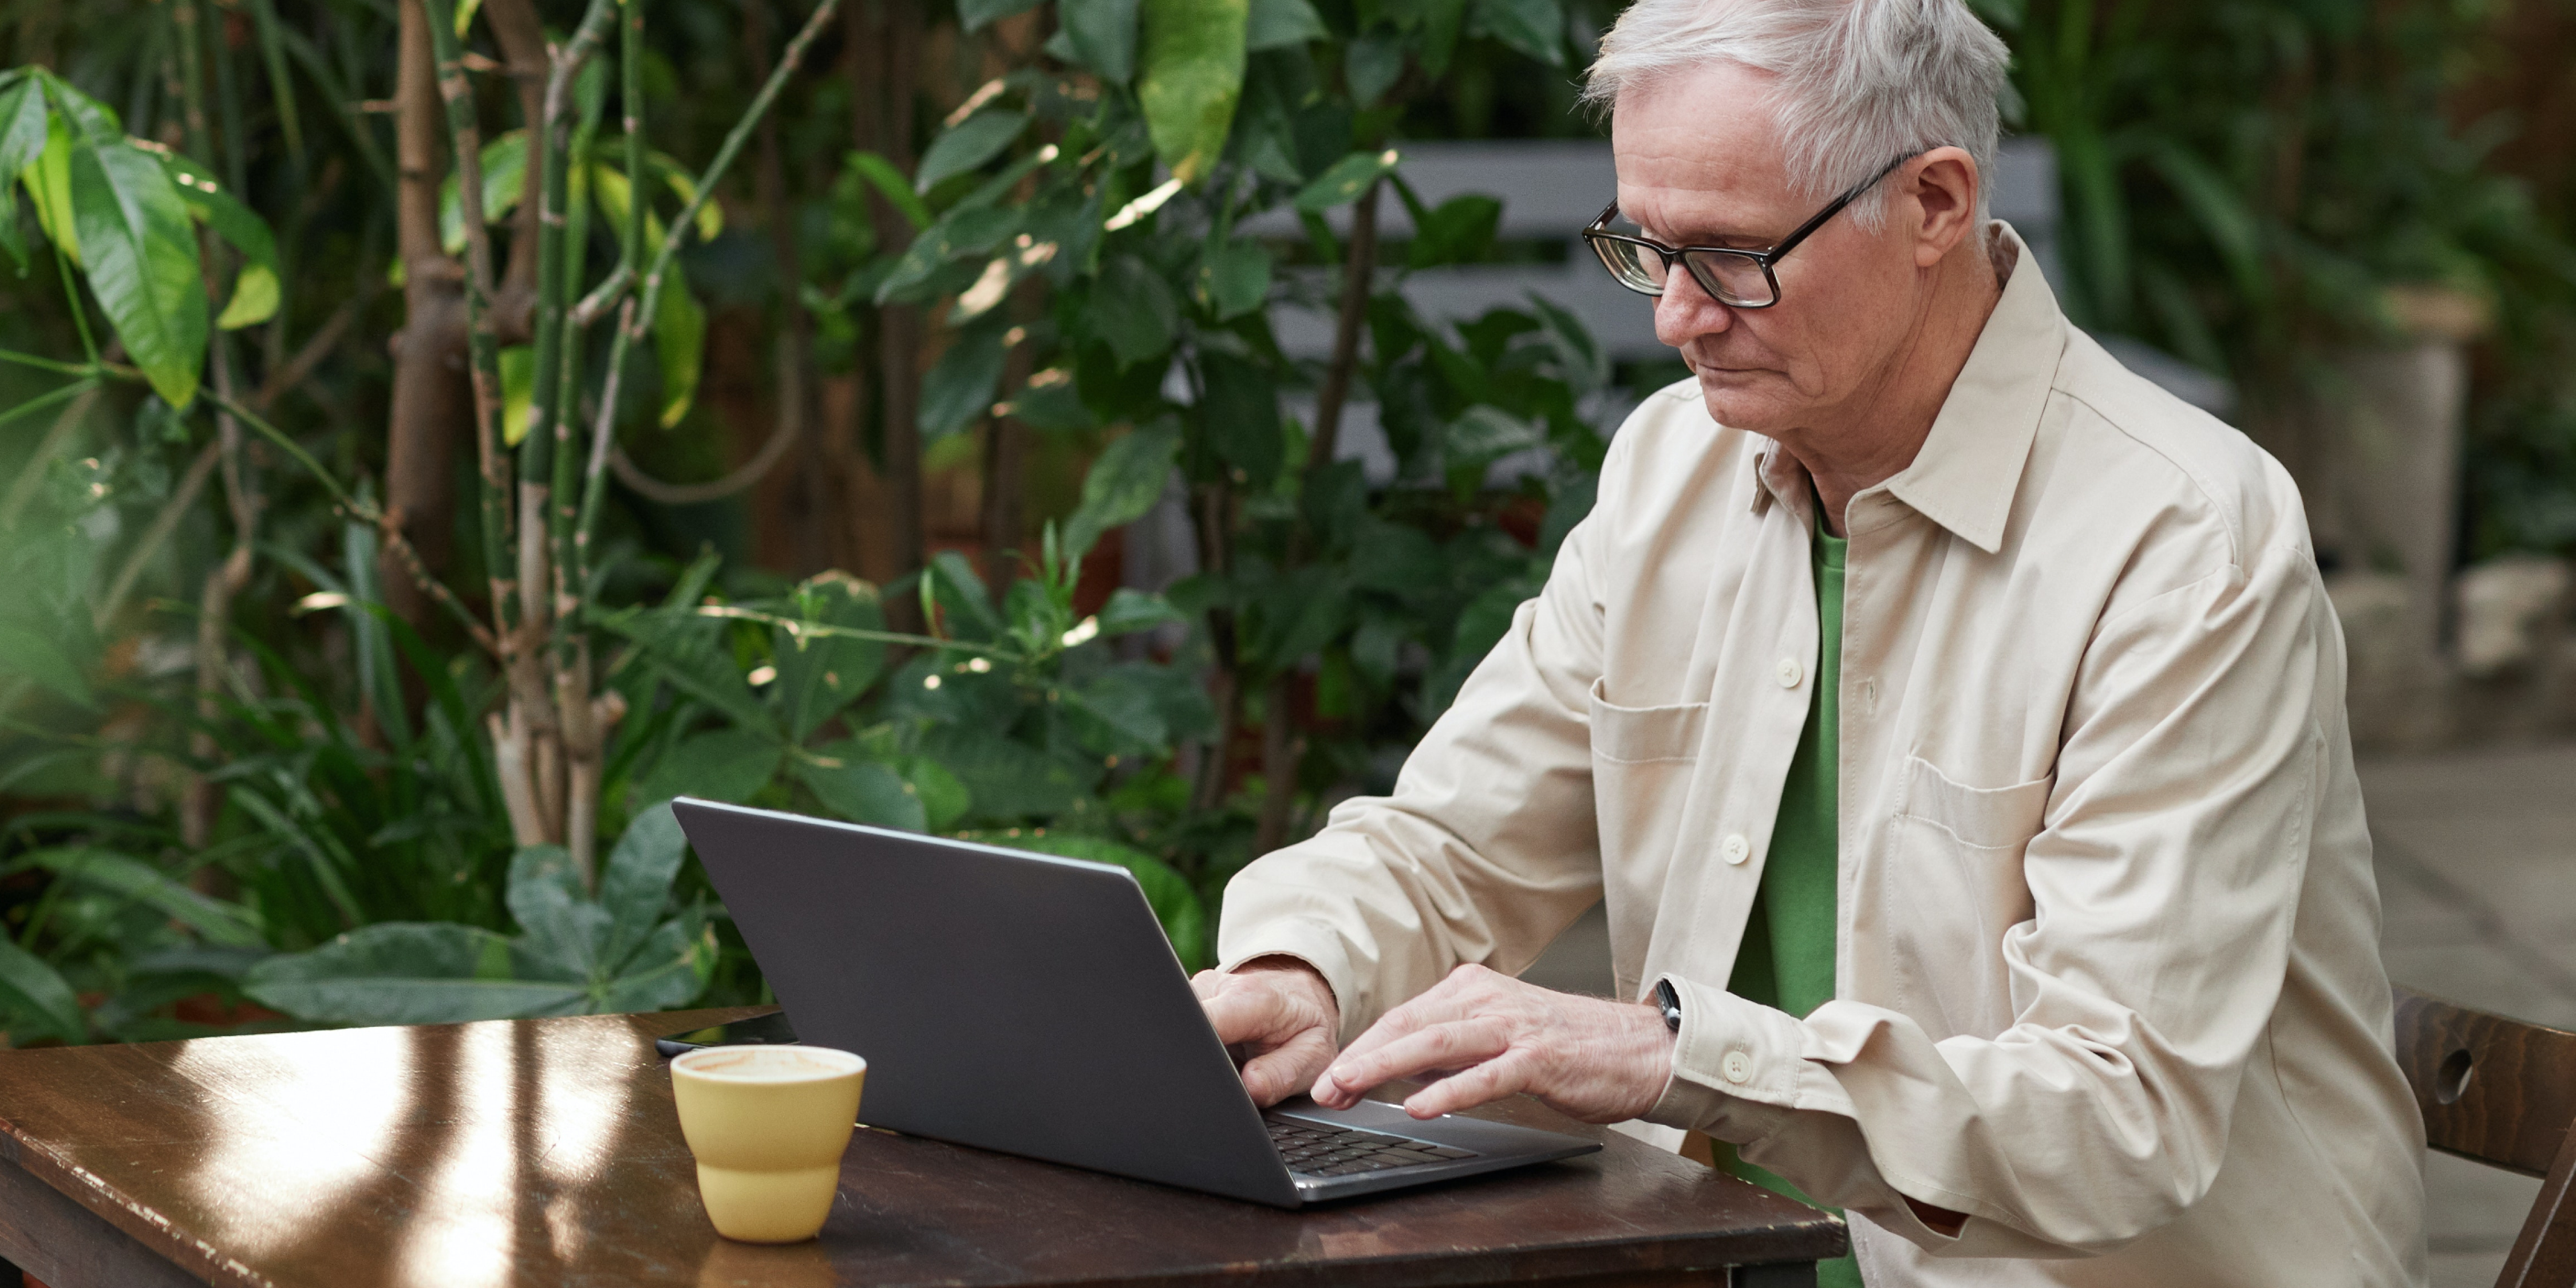 An image of a property owner filing a claim with Rhino on his laptop in a green garden